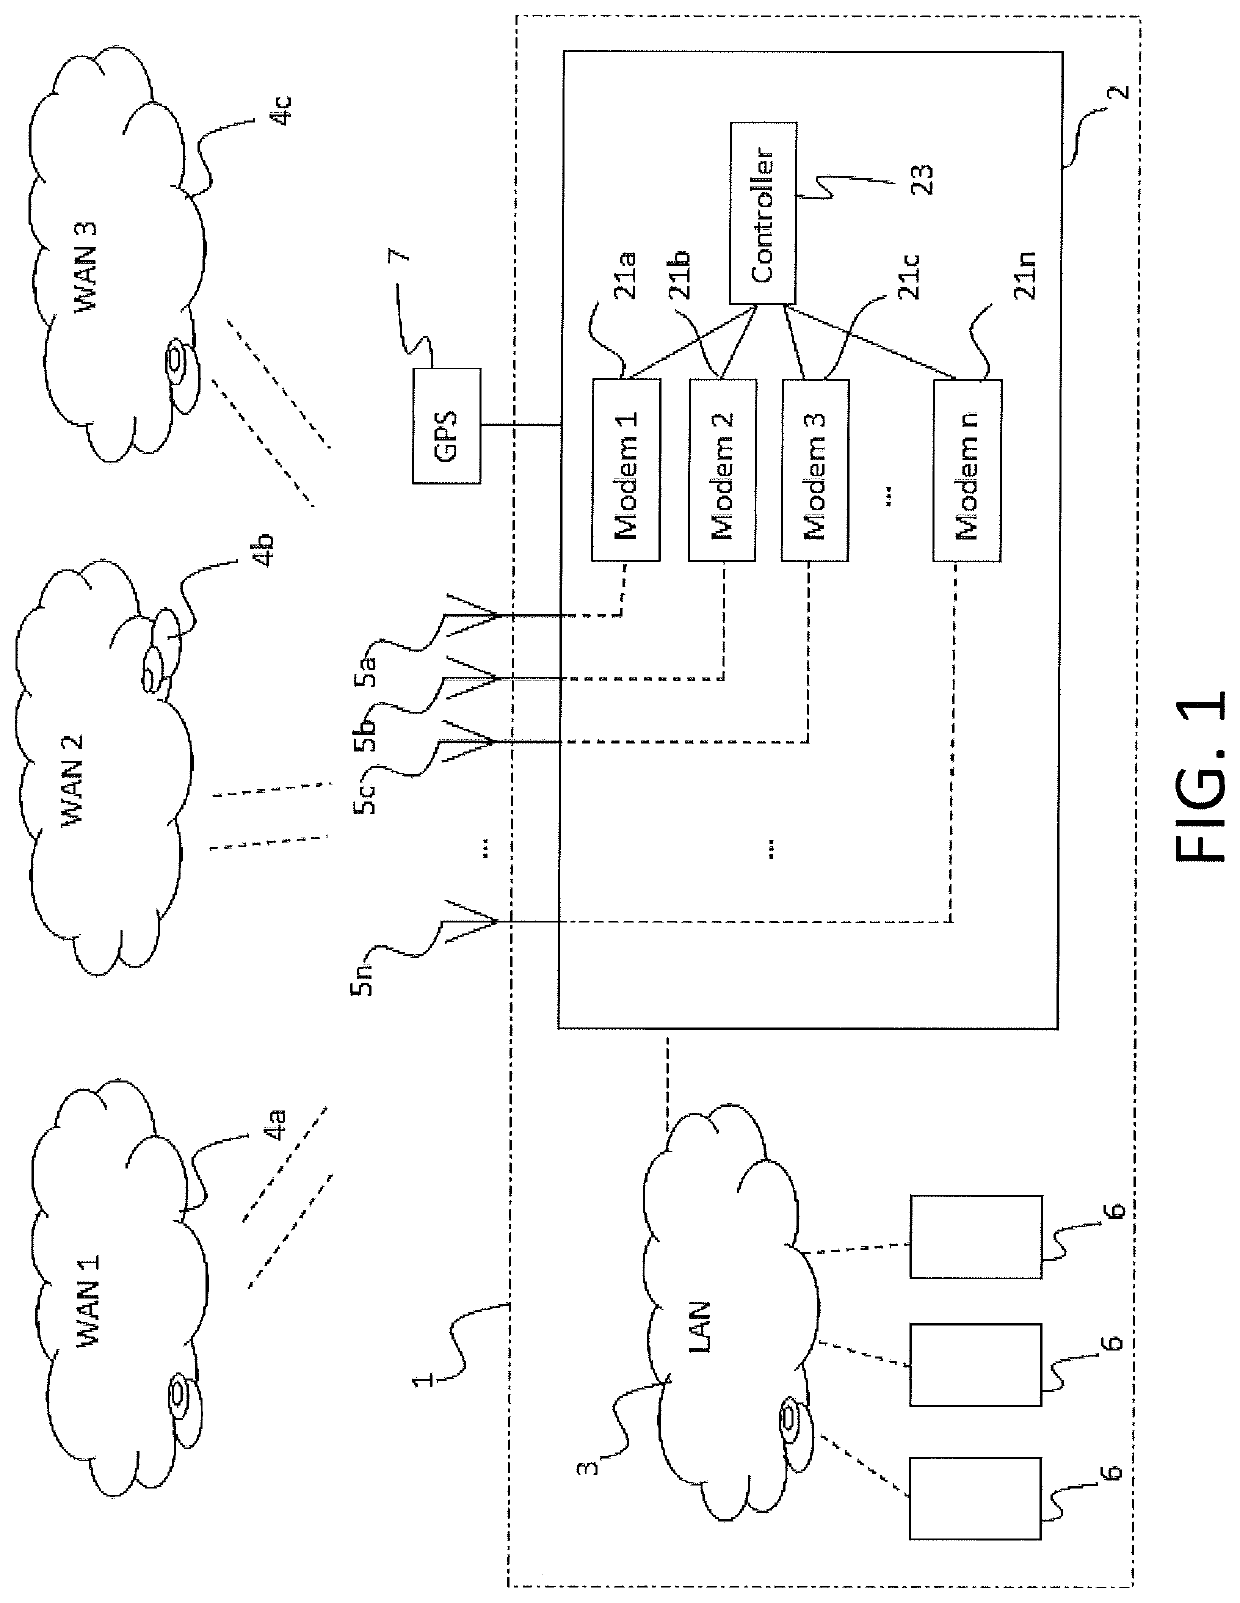 Dynamic traffic shaping for communication networks in moving vehicles, such as trains